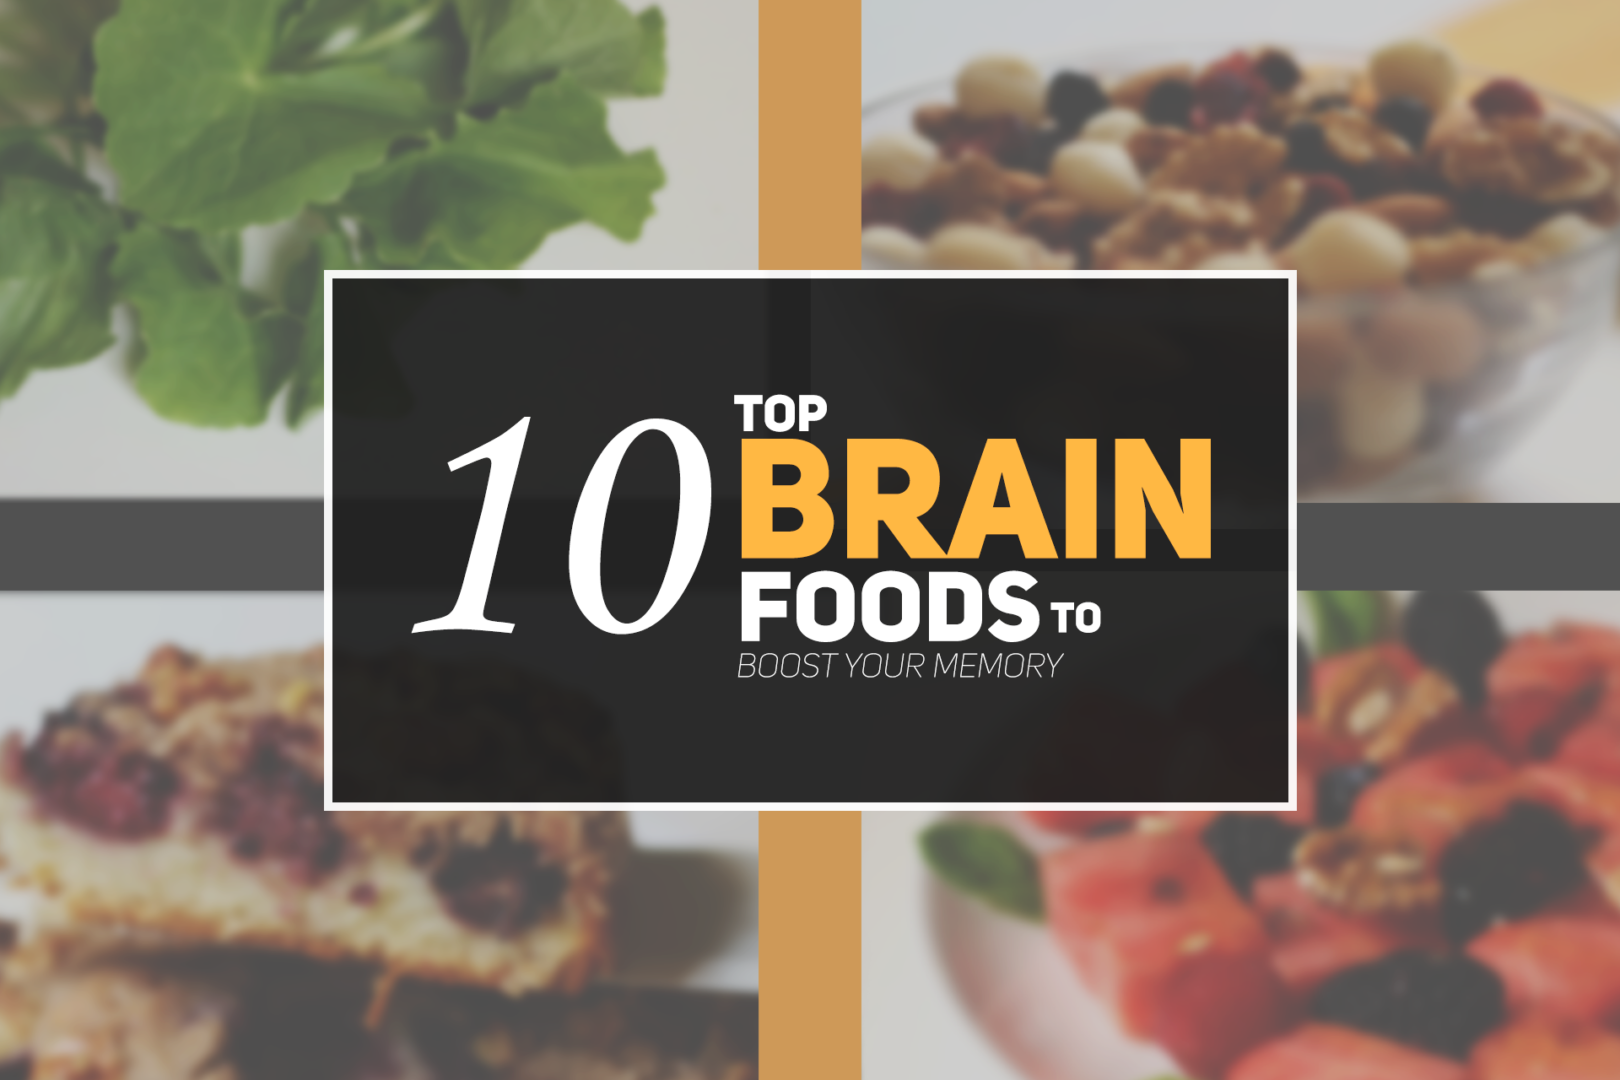 Top 10 Brain Foods that improve your memory